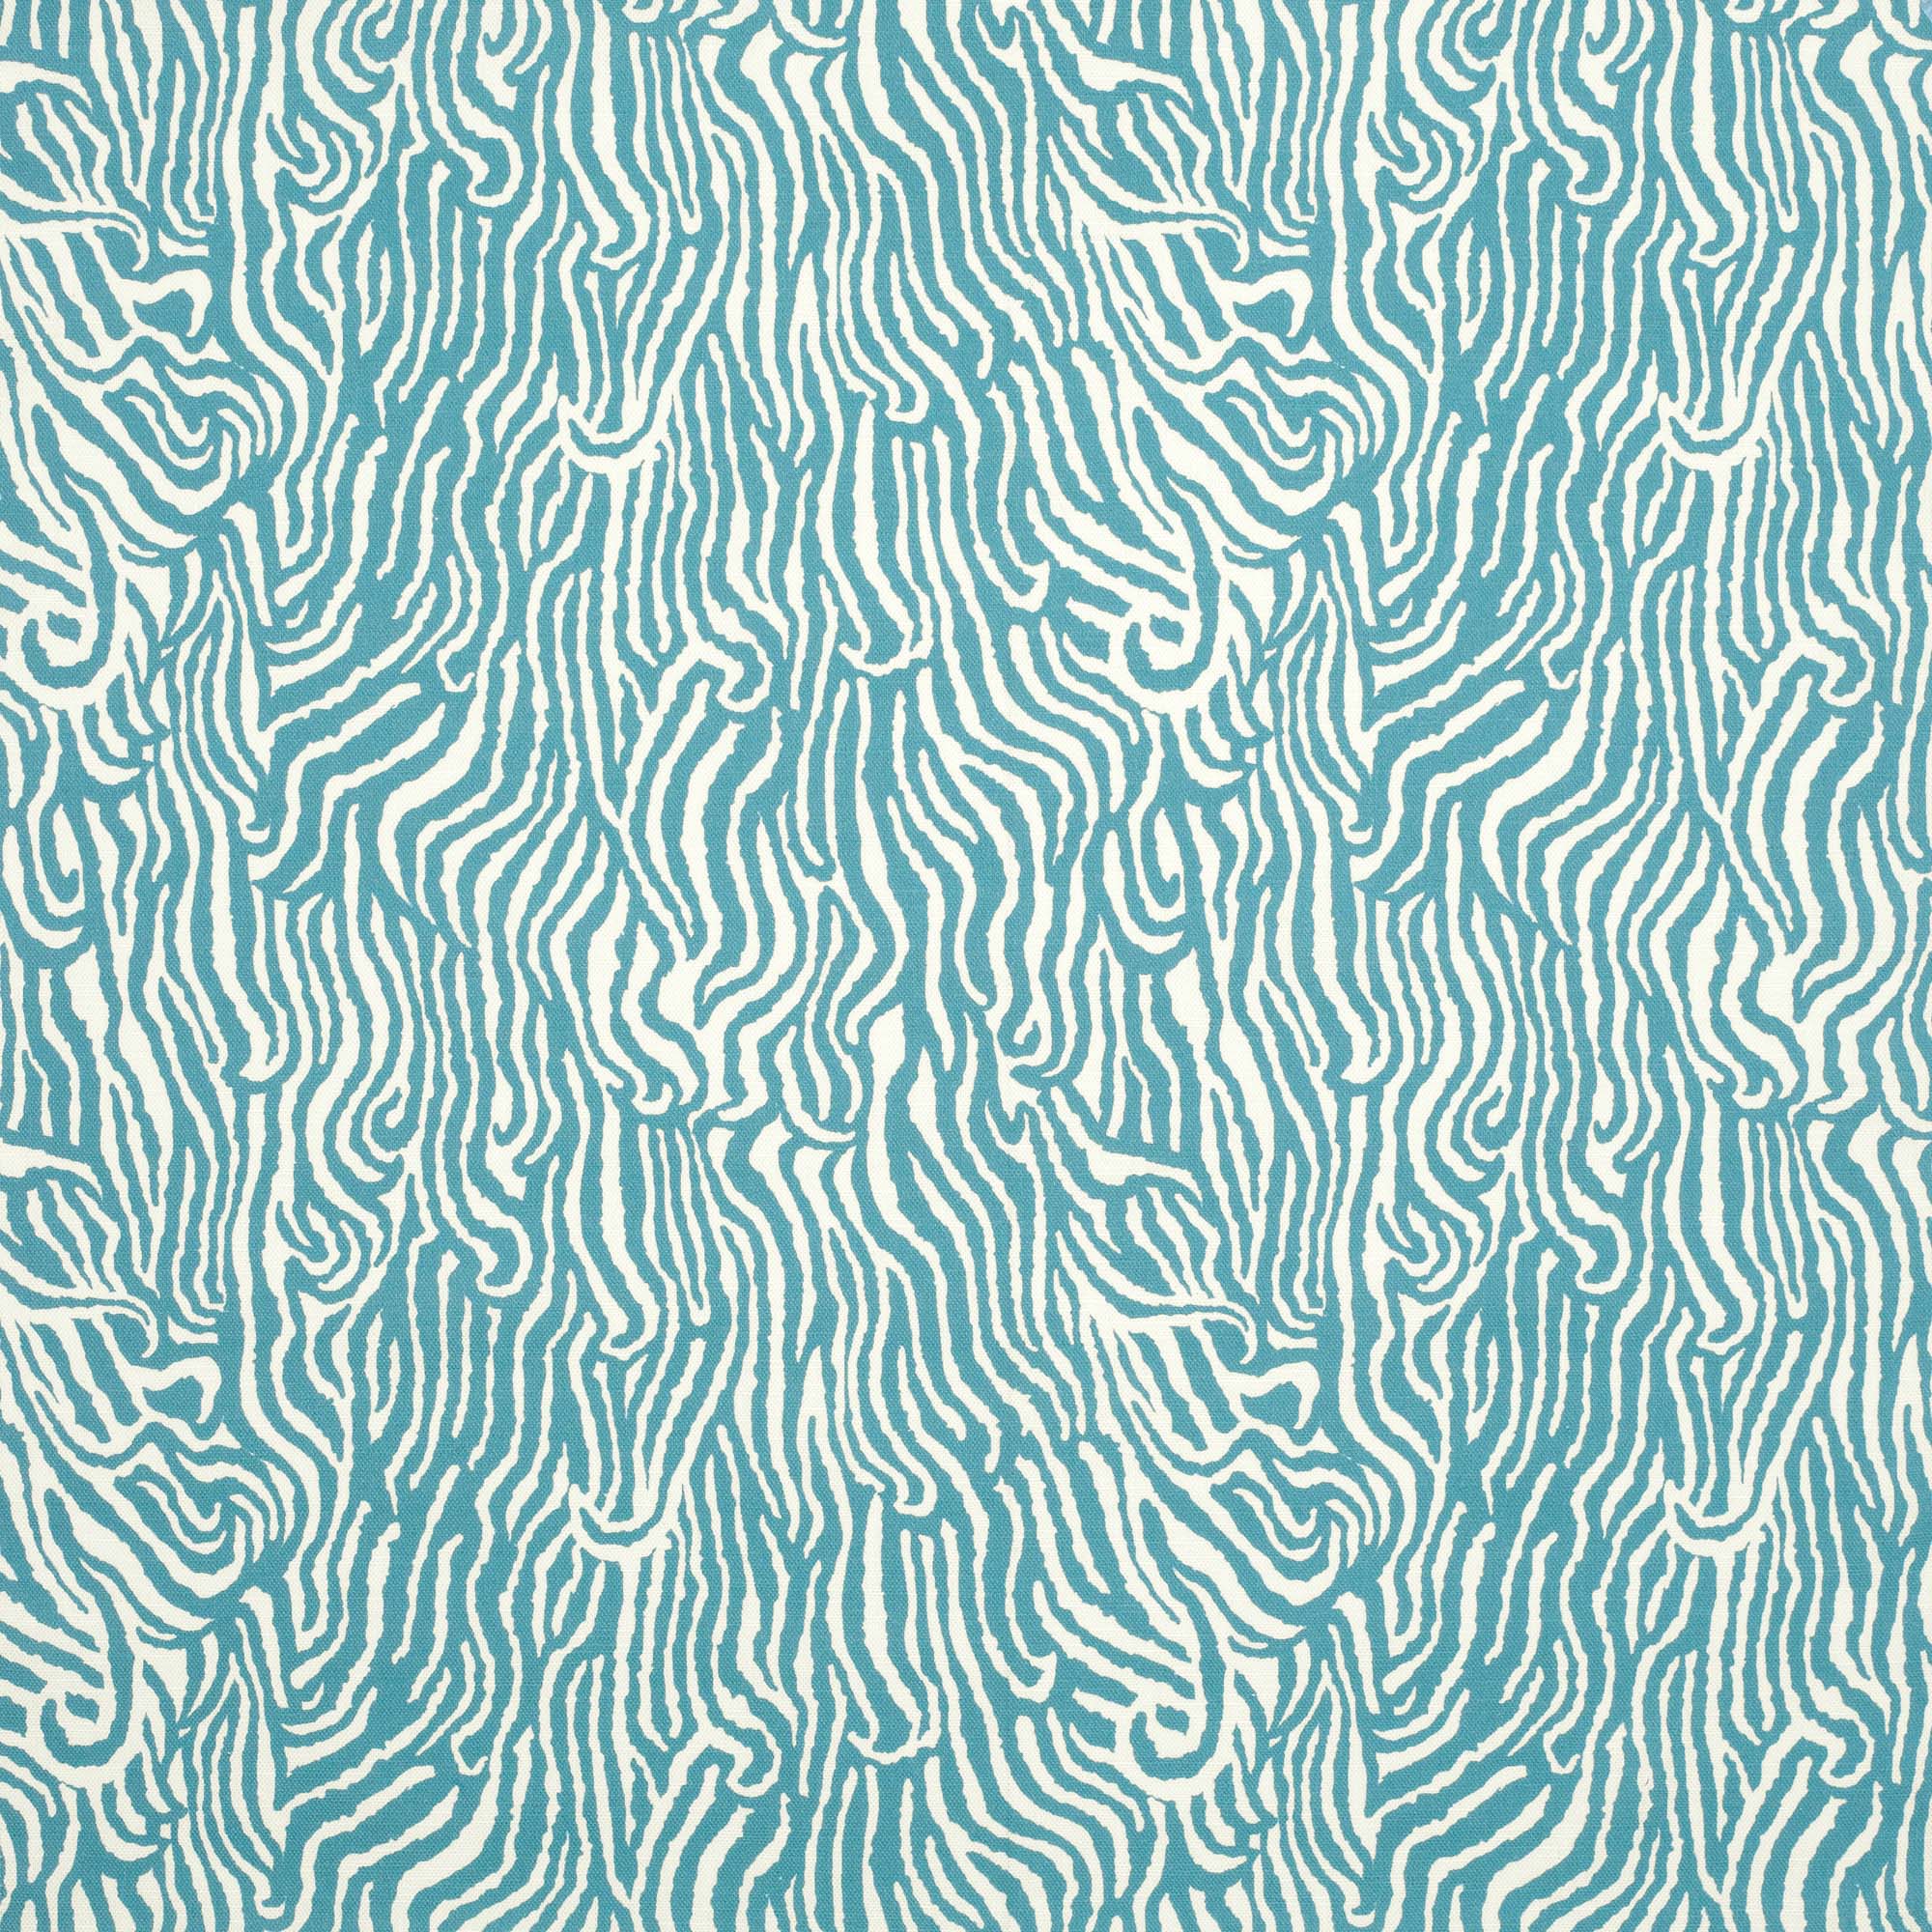 Detail of fabric in a playful animal print in blue on a white field.